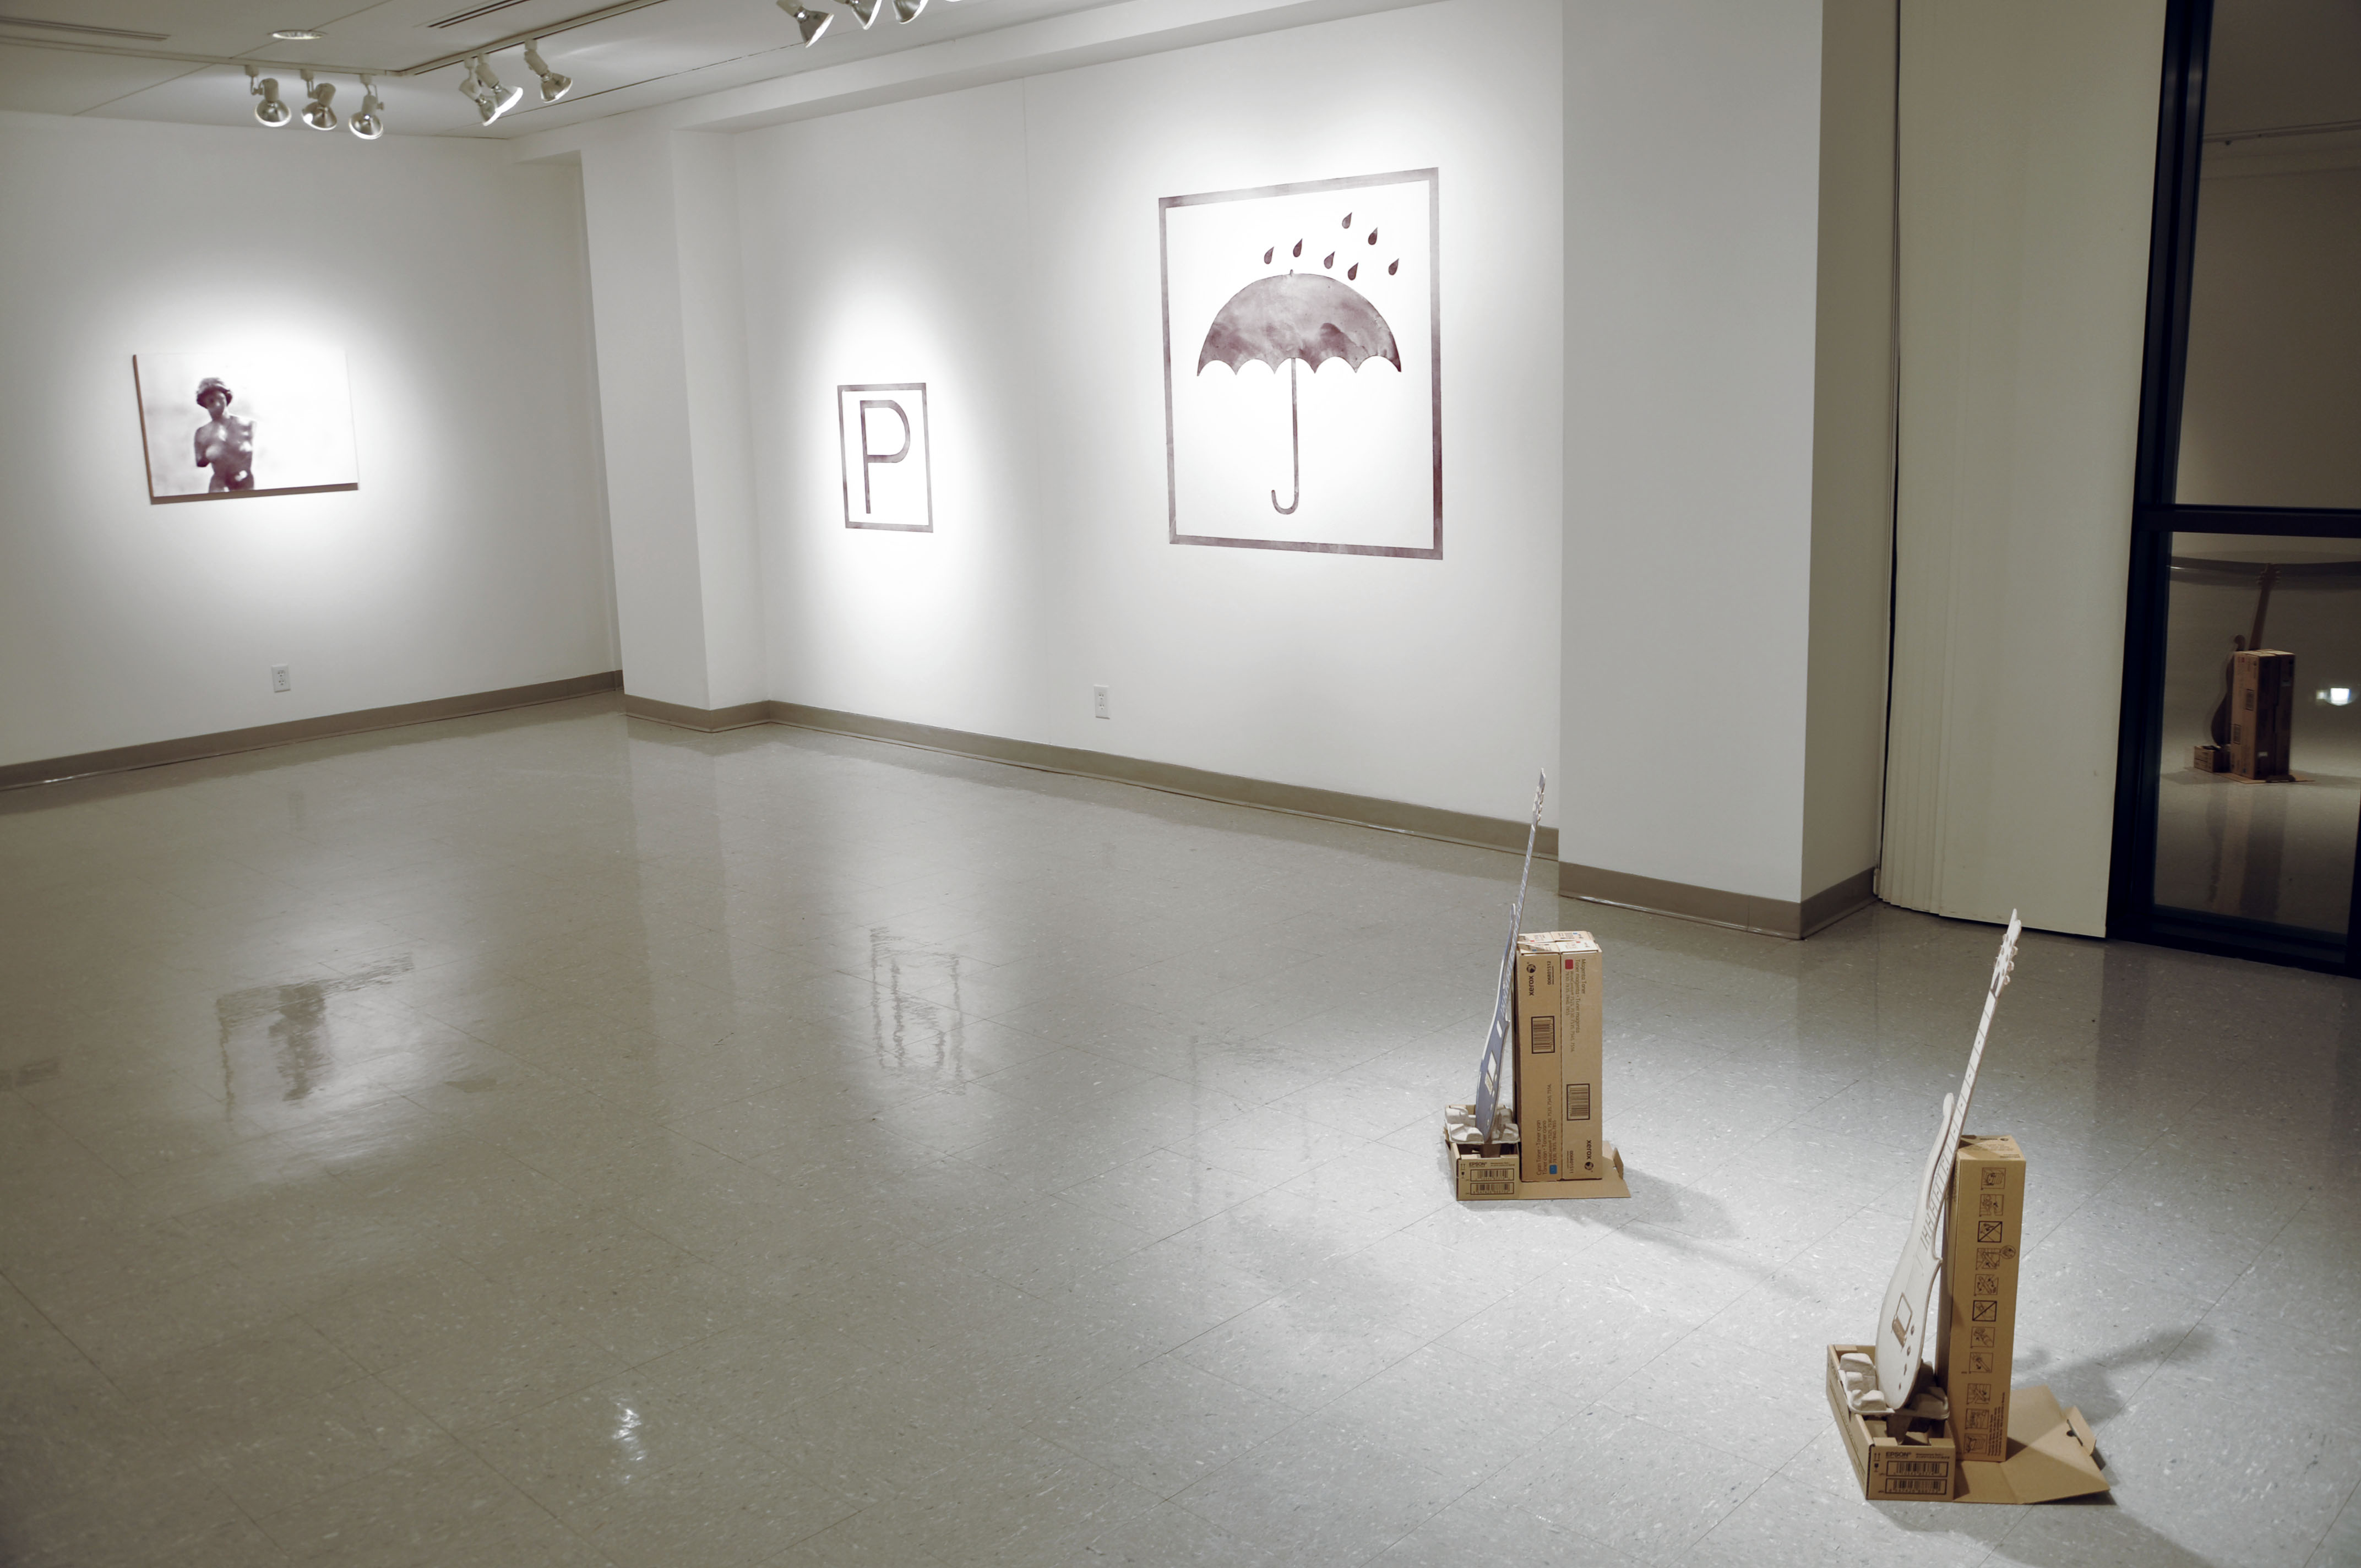 Image: Avez Vous un Crayon? (installation view) by Lyndon Barrois Jr. University of Illinois Springfield Visual Arts Gallery, September 2016. Two guitar cutouts lean against cardboard-like boxes on the gallery floor and three pieces hang on the gallery walls; one features an umbrella with raindrops, a smaller one of the letter ‘P’ and the third of the silhouette of a figure. Image courtesy of Lyndon Barrois Jr.